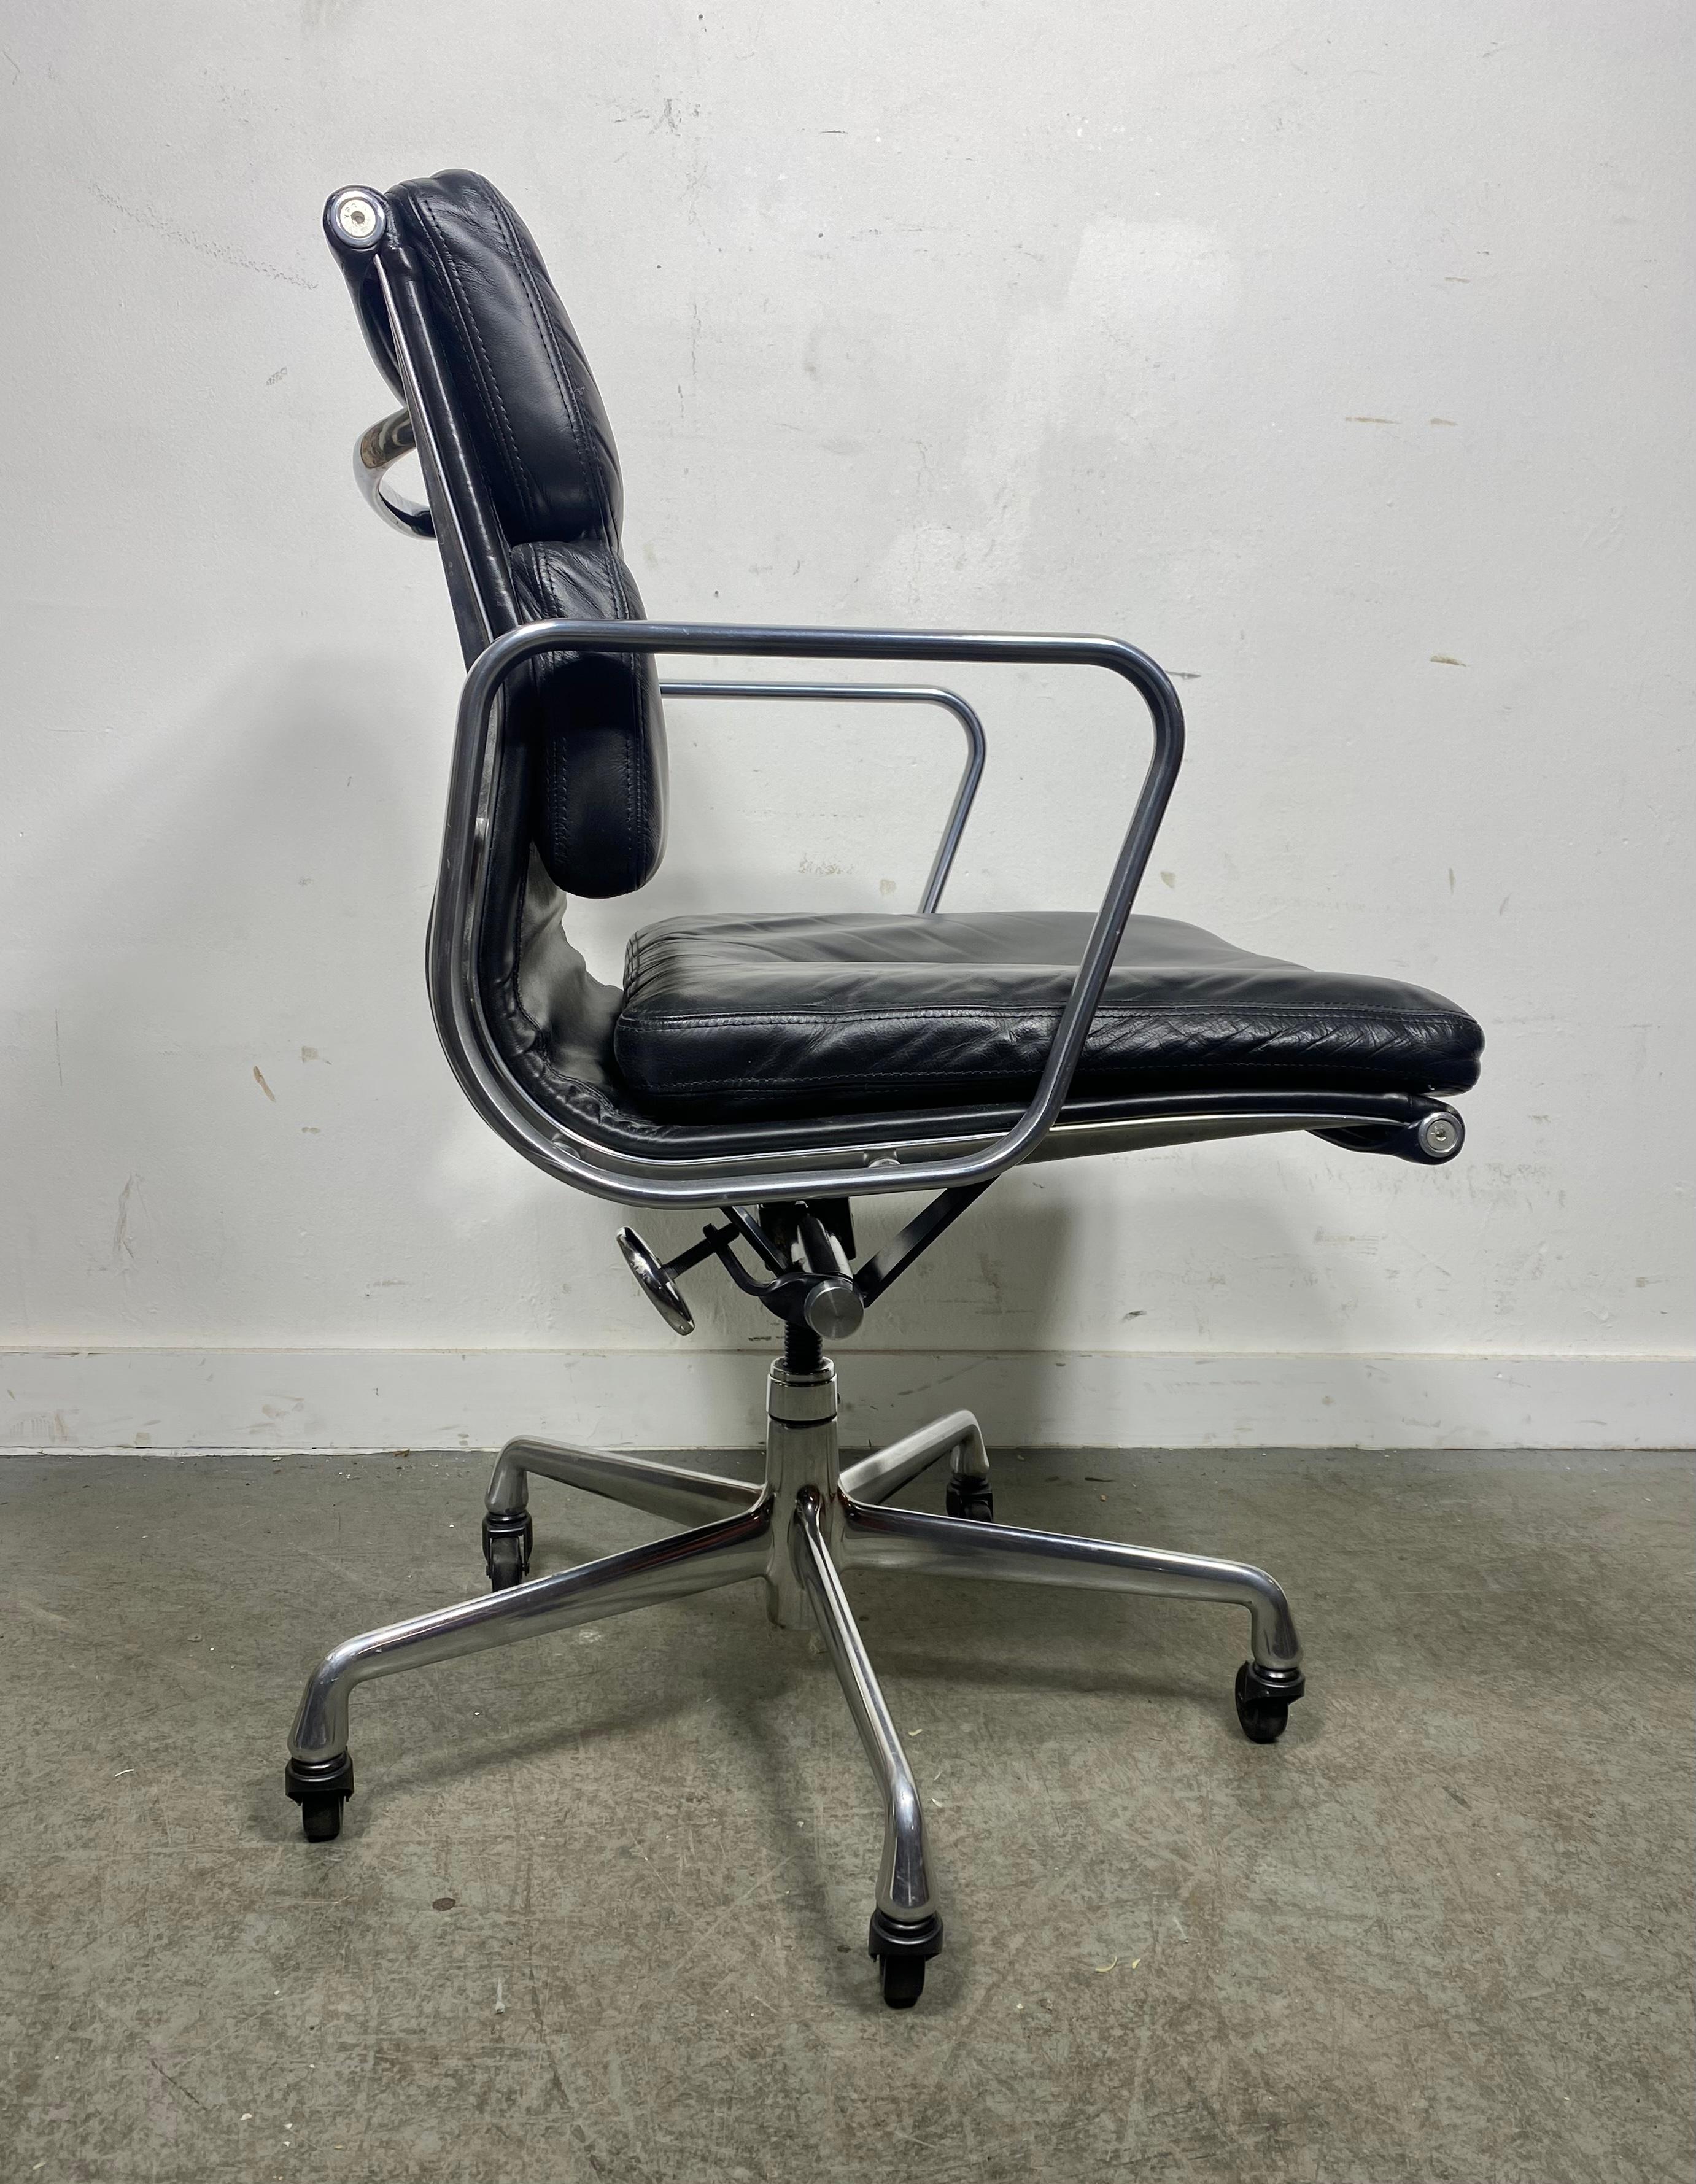 Handsome and elegant Eames soft pad desk/office chair from the Eames Aluminum Group series by Herman Miller. Classic understated design perfection from Charles and Ray Eames. Executed in black leather and aluminum. This model features all the bells